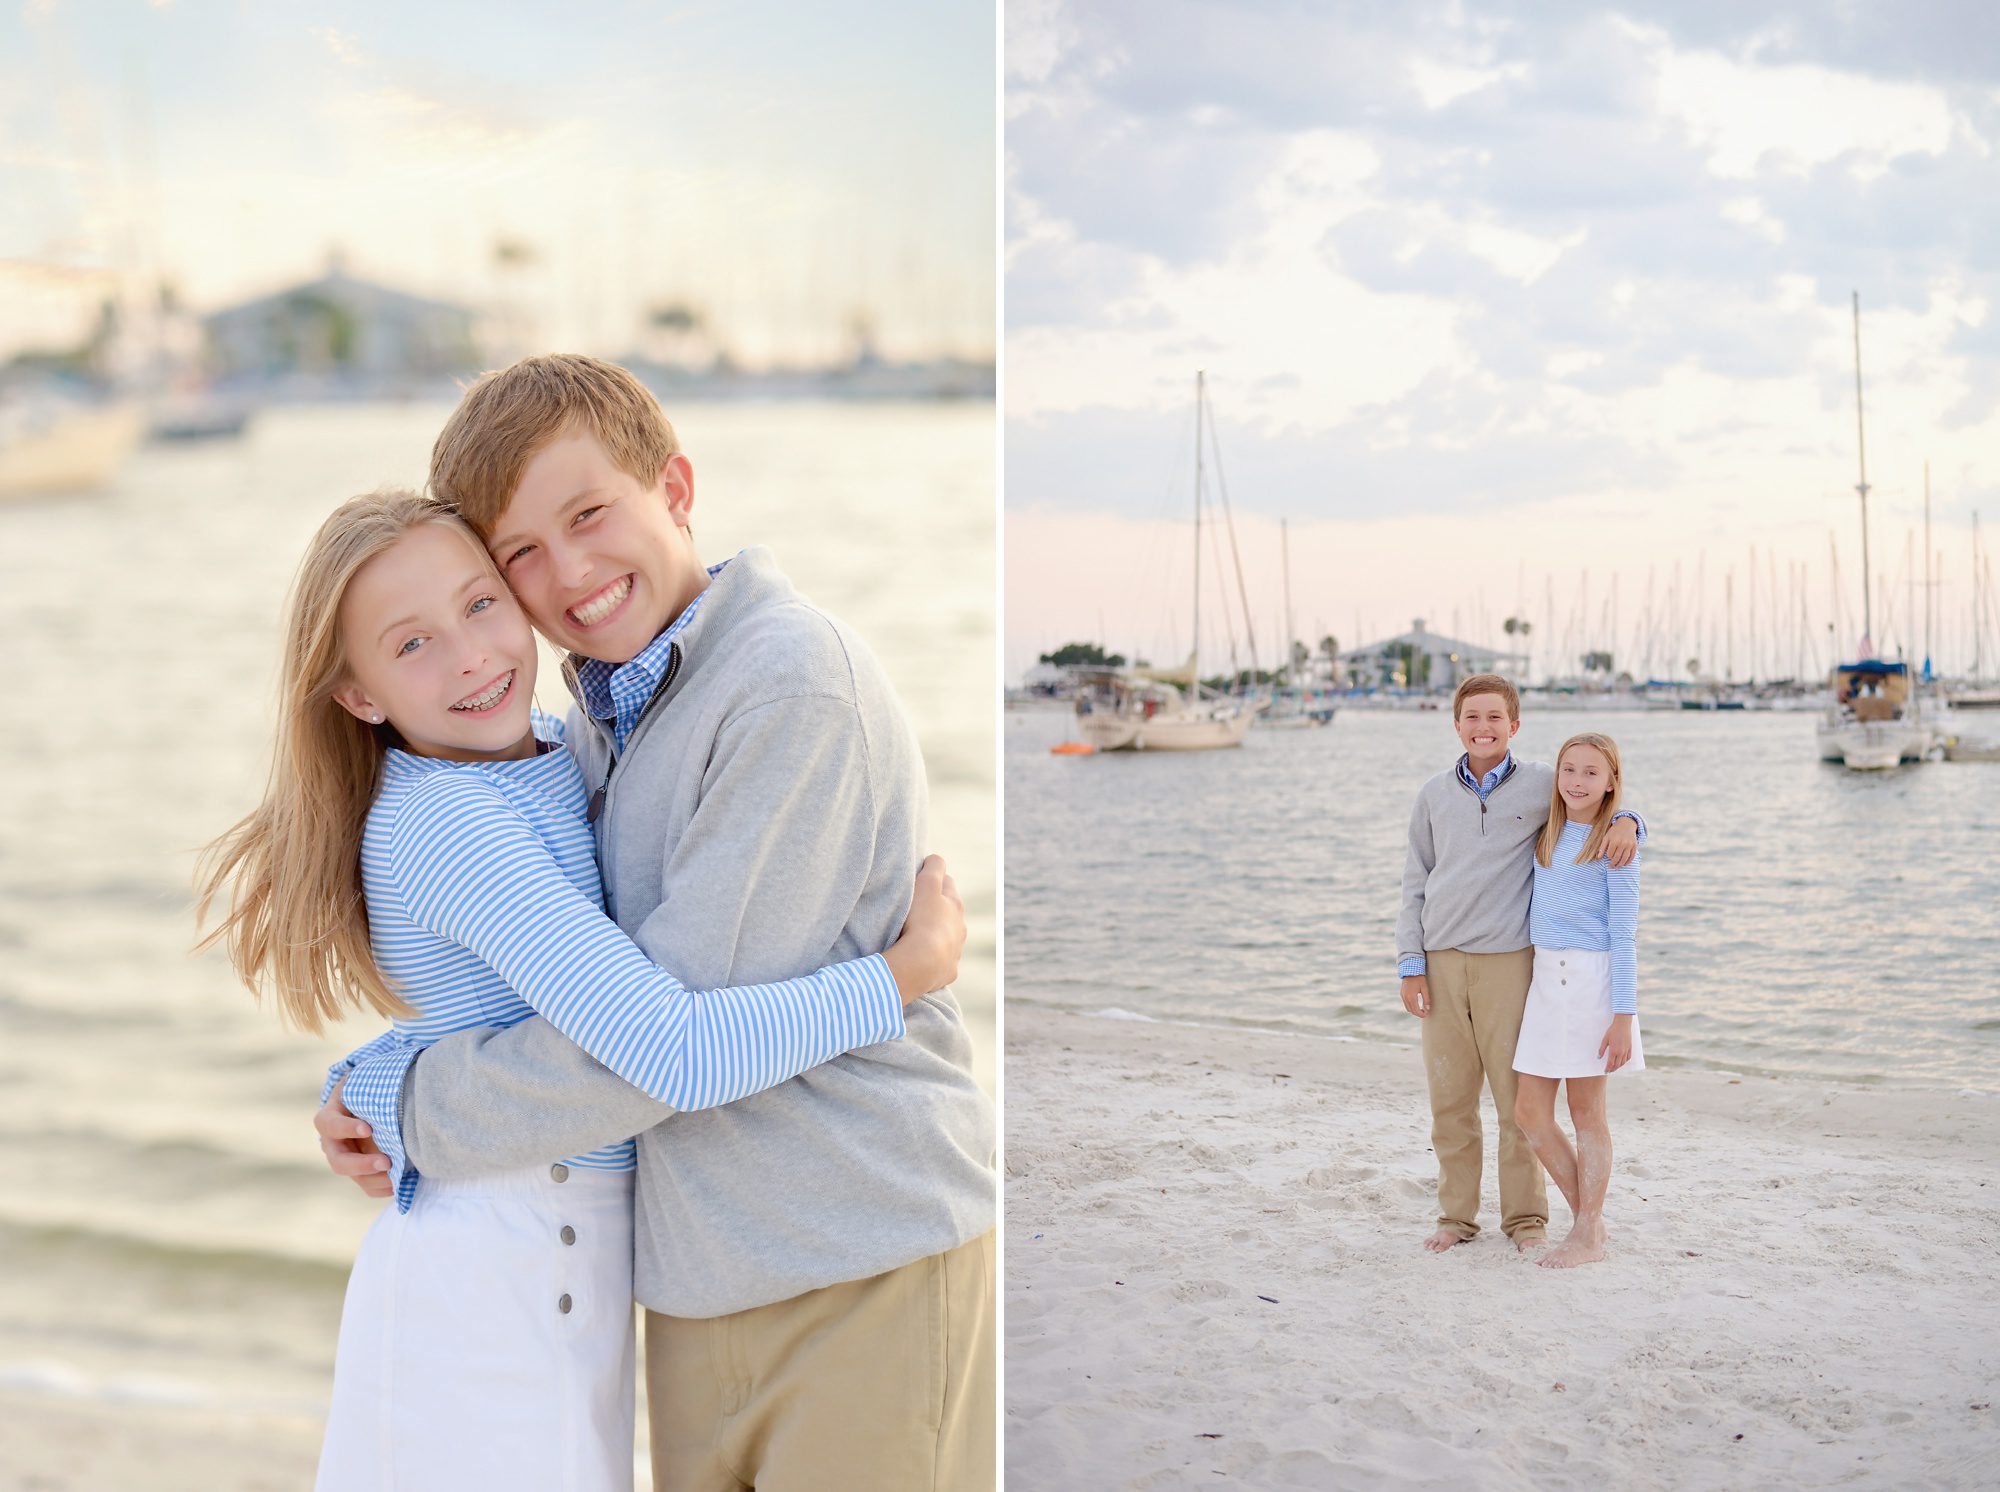 An adorable family of 4 with 2 kids in the early teen years get fun family portraits at a small beach in Tampa, FL with sailboats in the background.